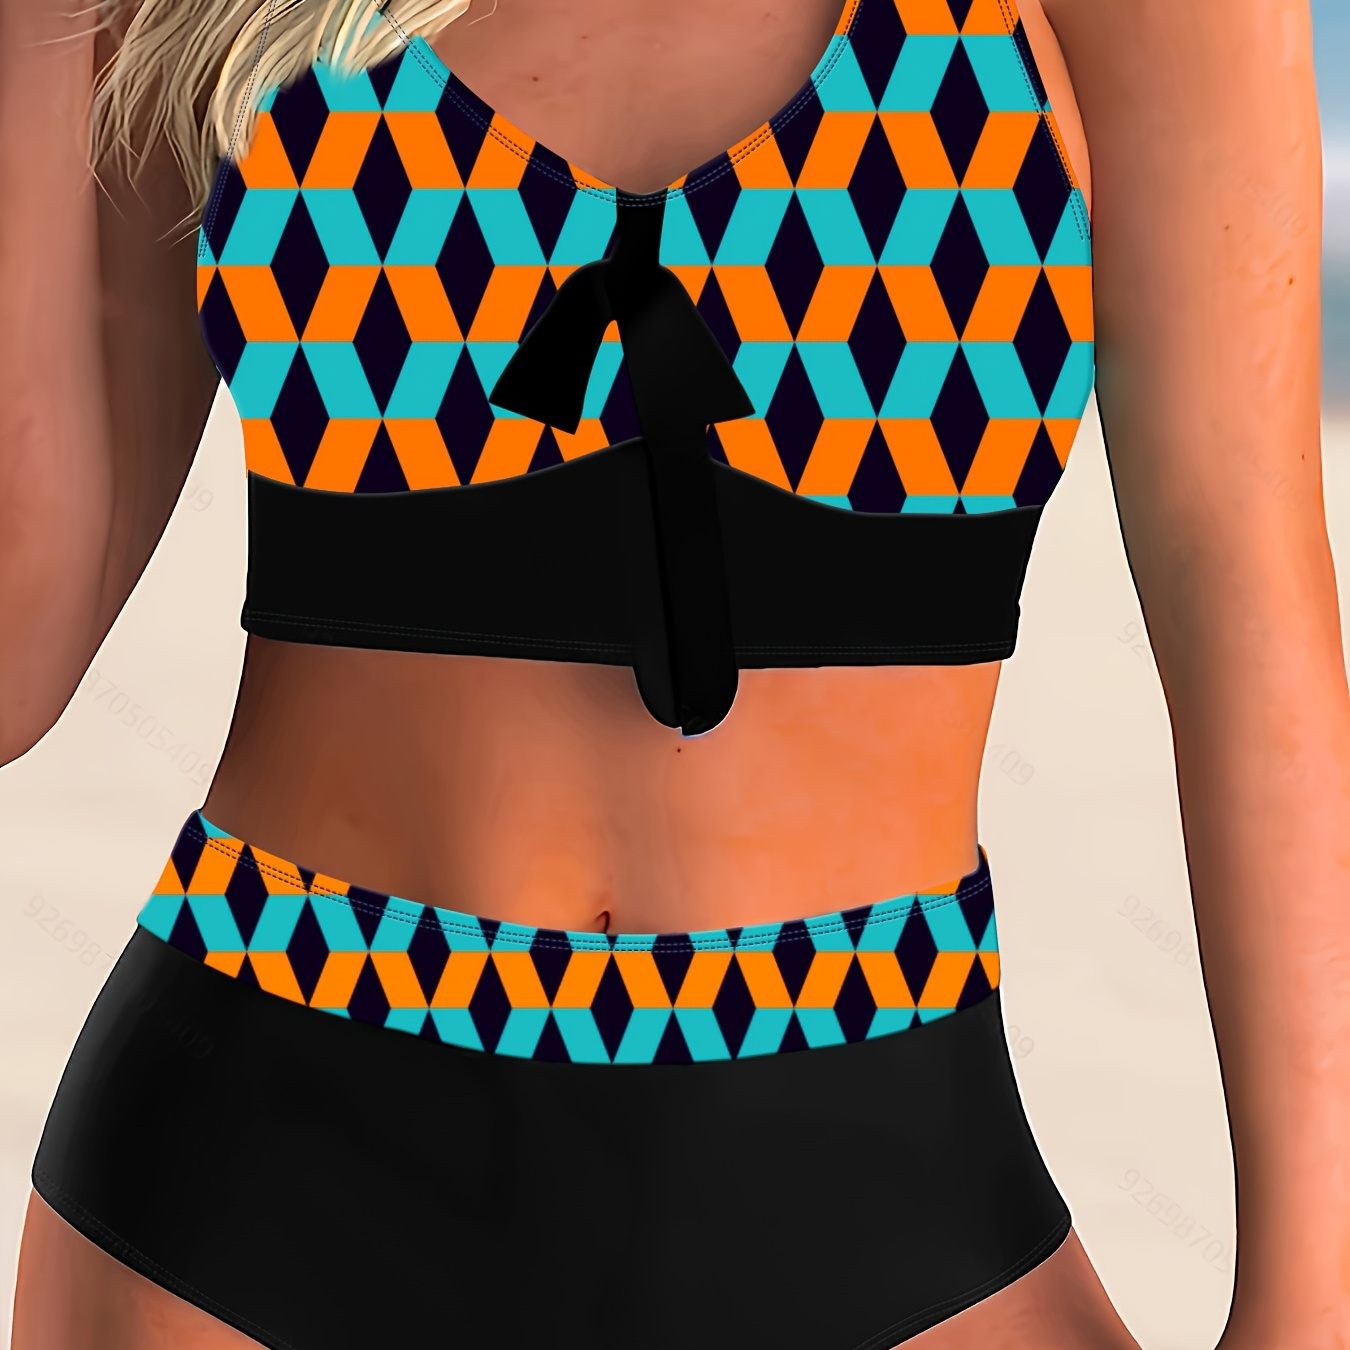 

Plus Size High-waisted Two-piece Bikini Set For Women - Sexy Geometric Pattern Swimwear With Front Tie Top And High Rise Bottoms